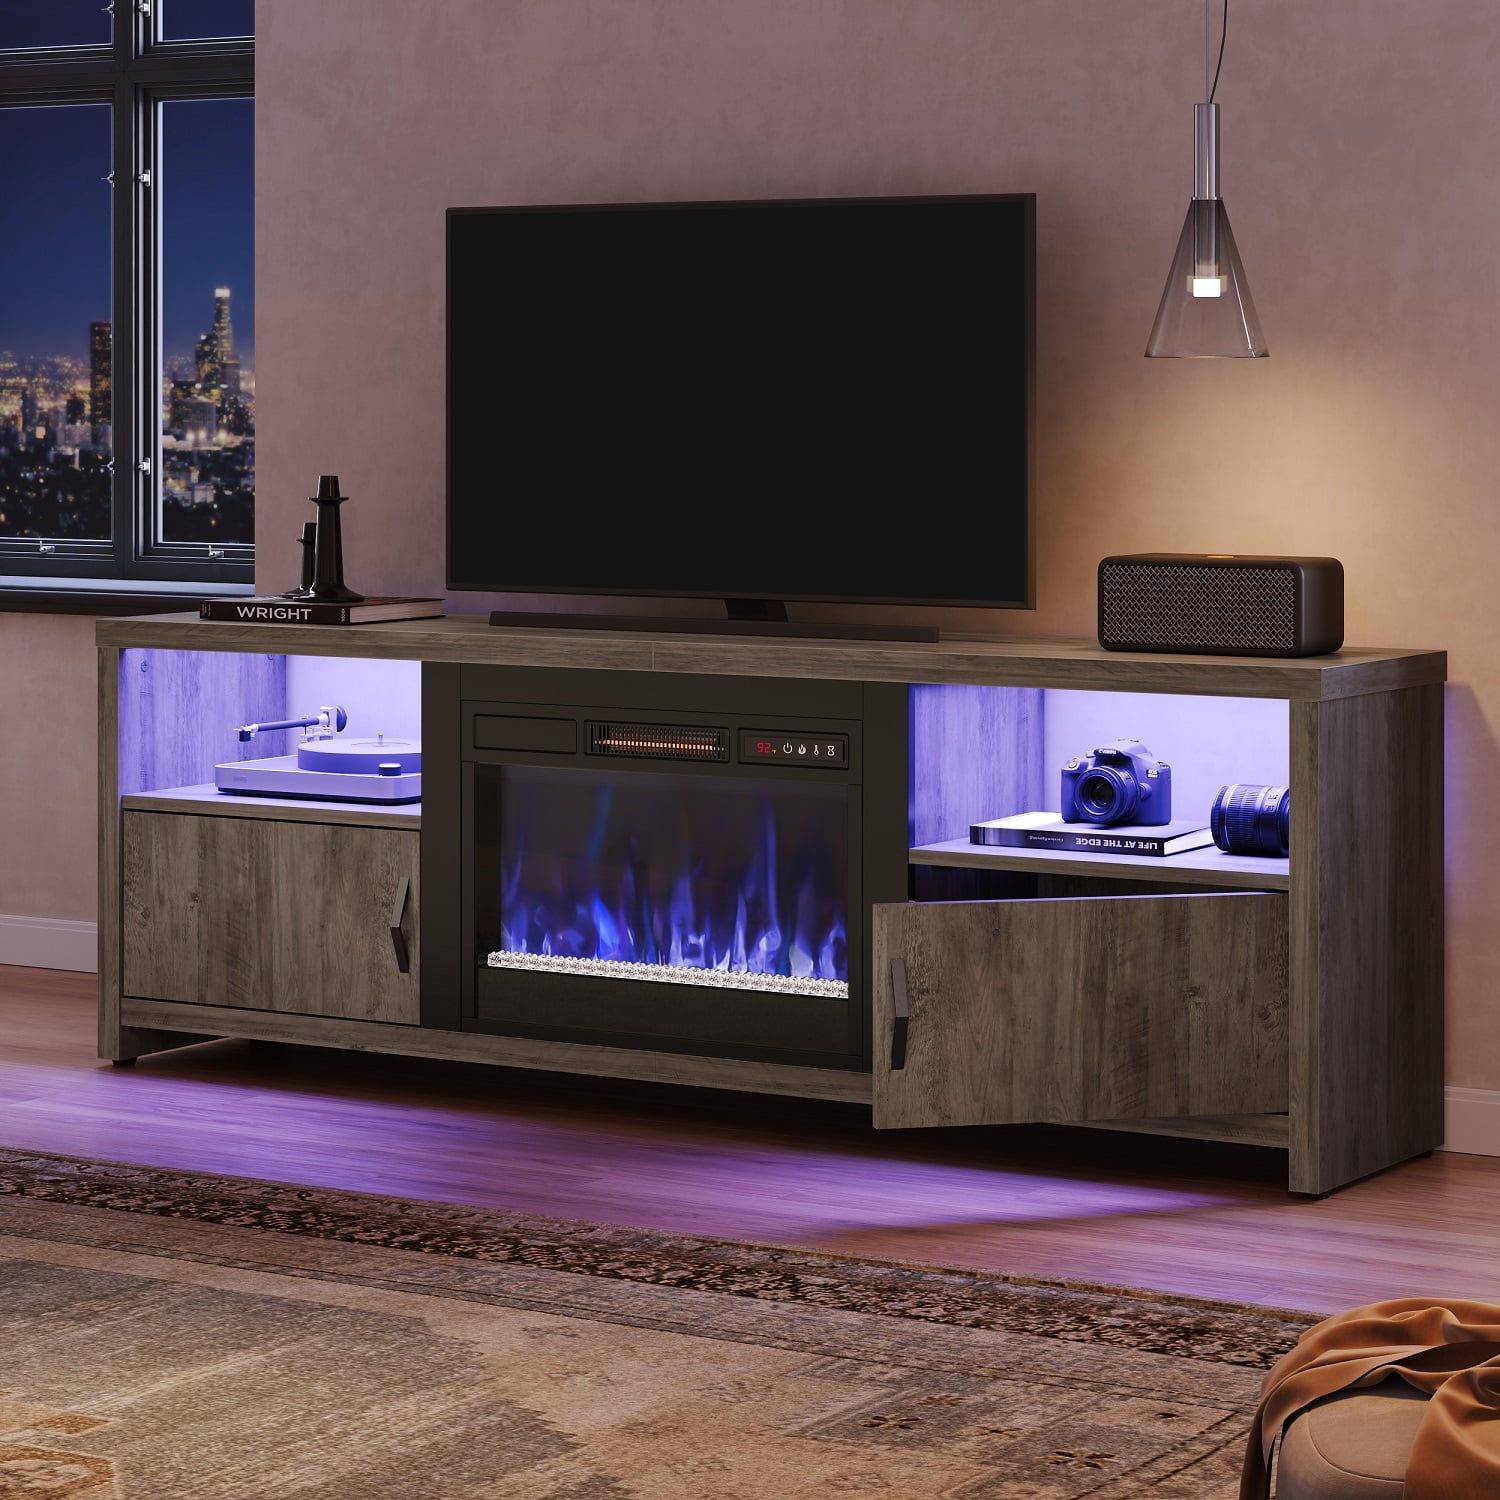 Bestier Electric Fireplace Tv Stand For Tvs Up To 75" Entertainment Intended For Bestier Tv Stand For Tvs Up To 75" (View 8 of 20)